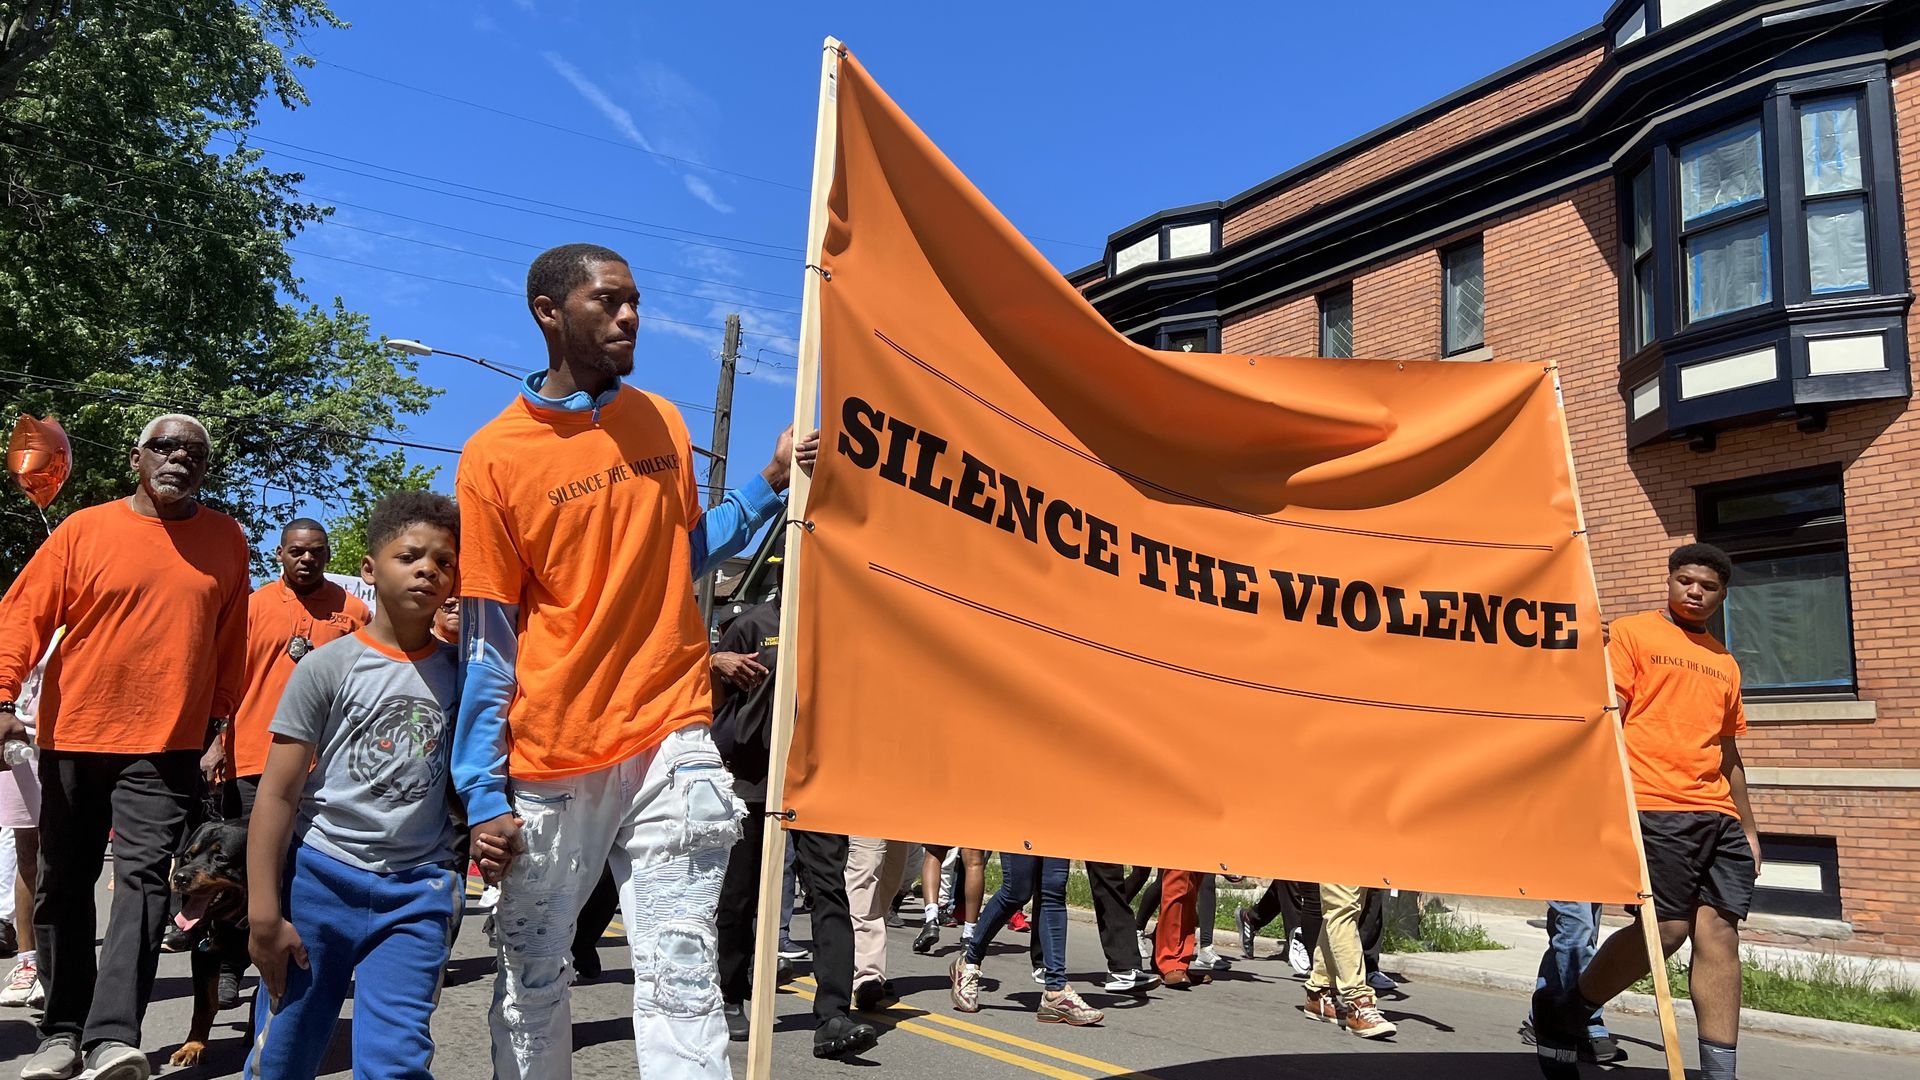 Marchers head down East Lafayette Street in Detroit to raise awareness for gun violence.